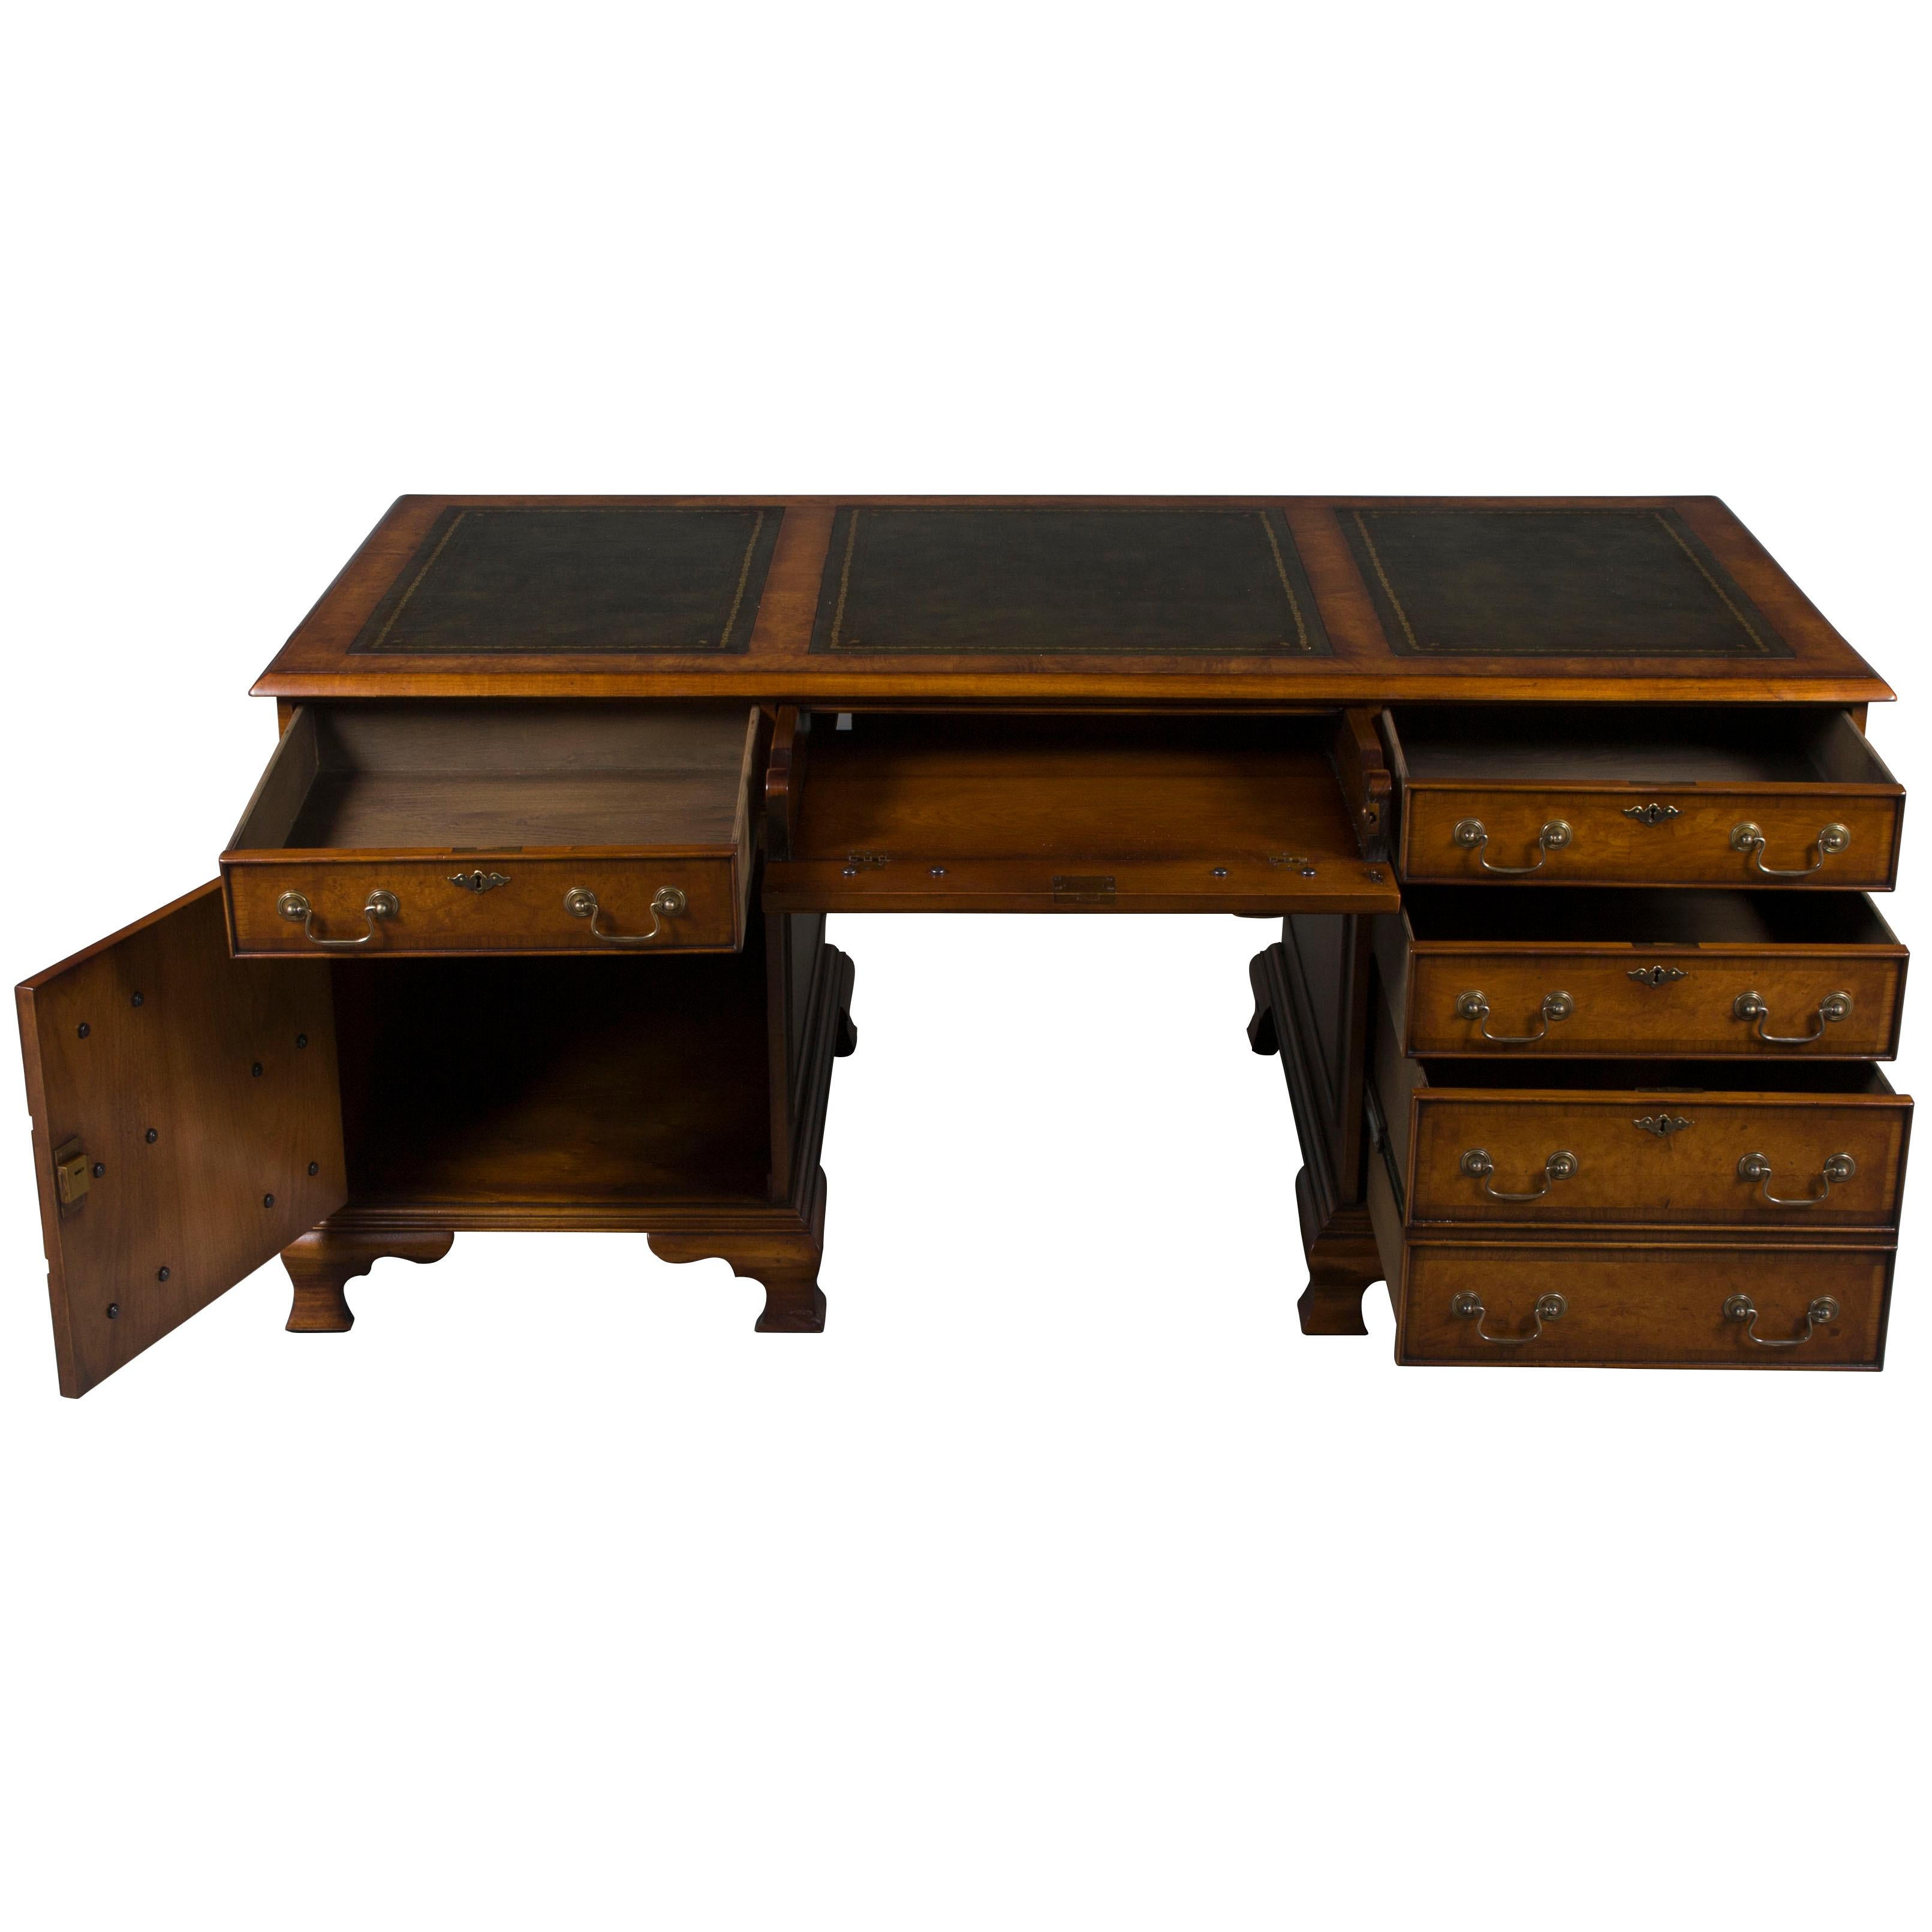 This beautiful walnut pedestal desk is English-made by hand as a Georgian period reproduction. The walnut boasts a rich complexion, enhanced by hand-finished surfaces and complemented by lovely cross banding and antiqued escutcheons and solid-brass